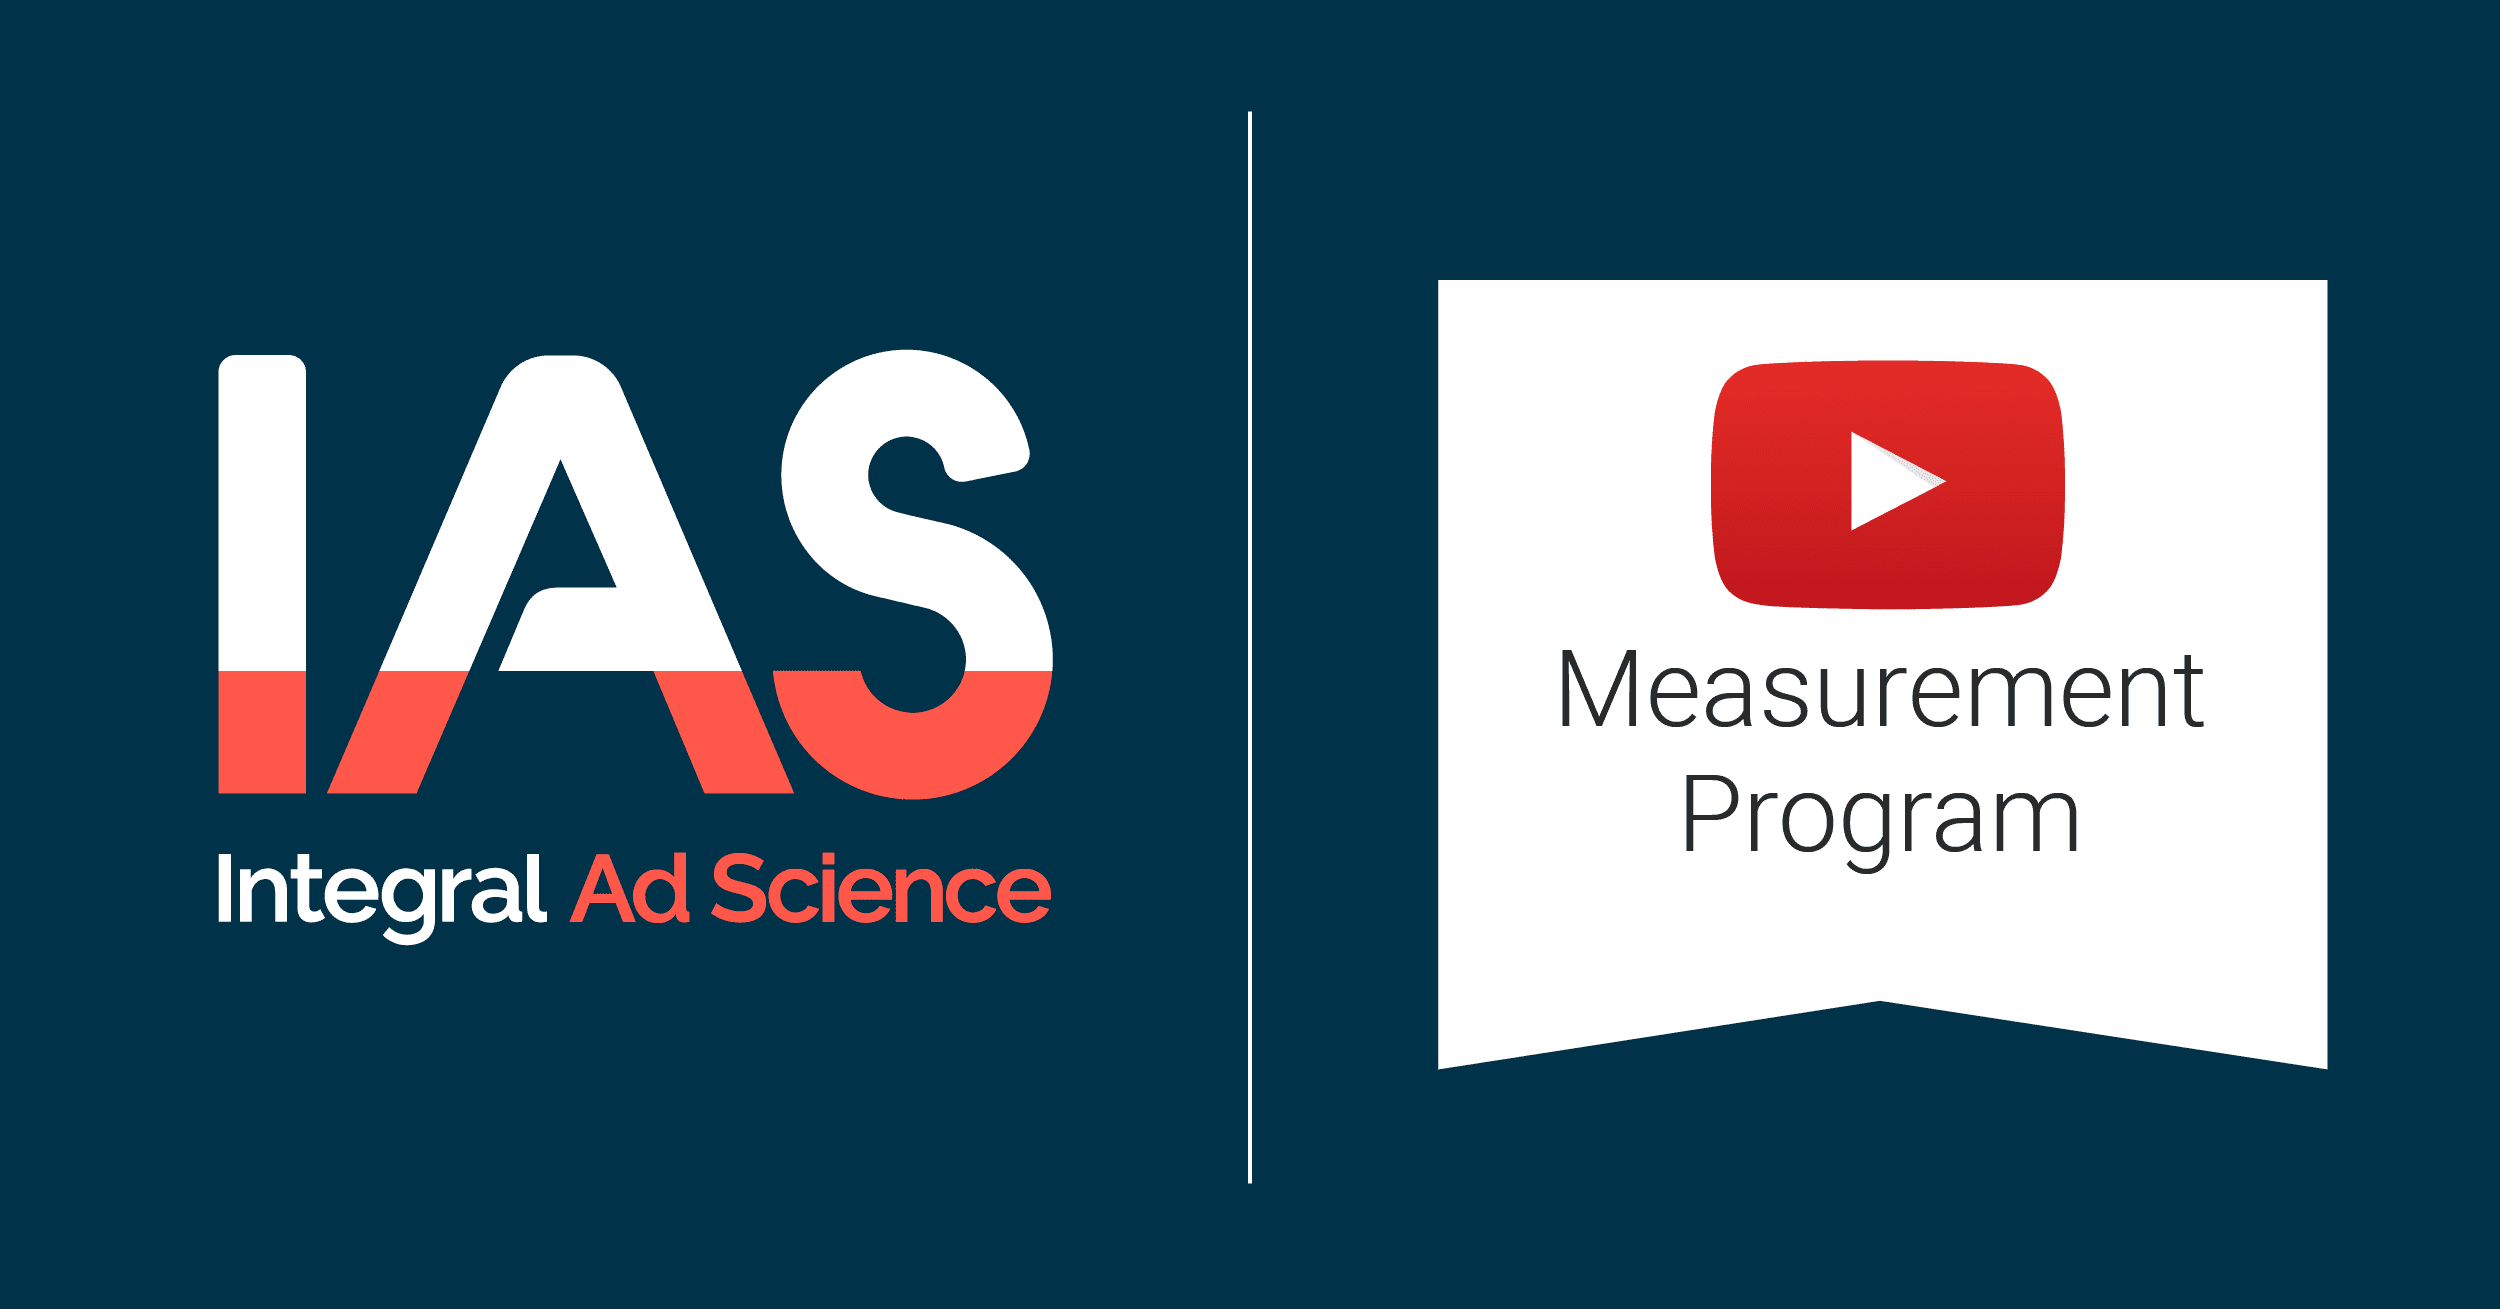 Integral Ad Science Is Selected for the YouTube Measurement Program